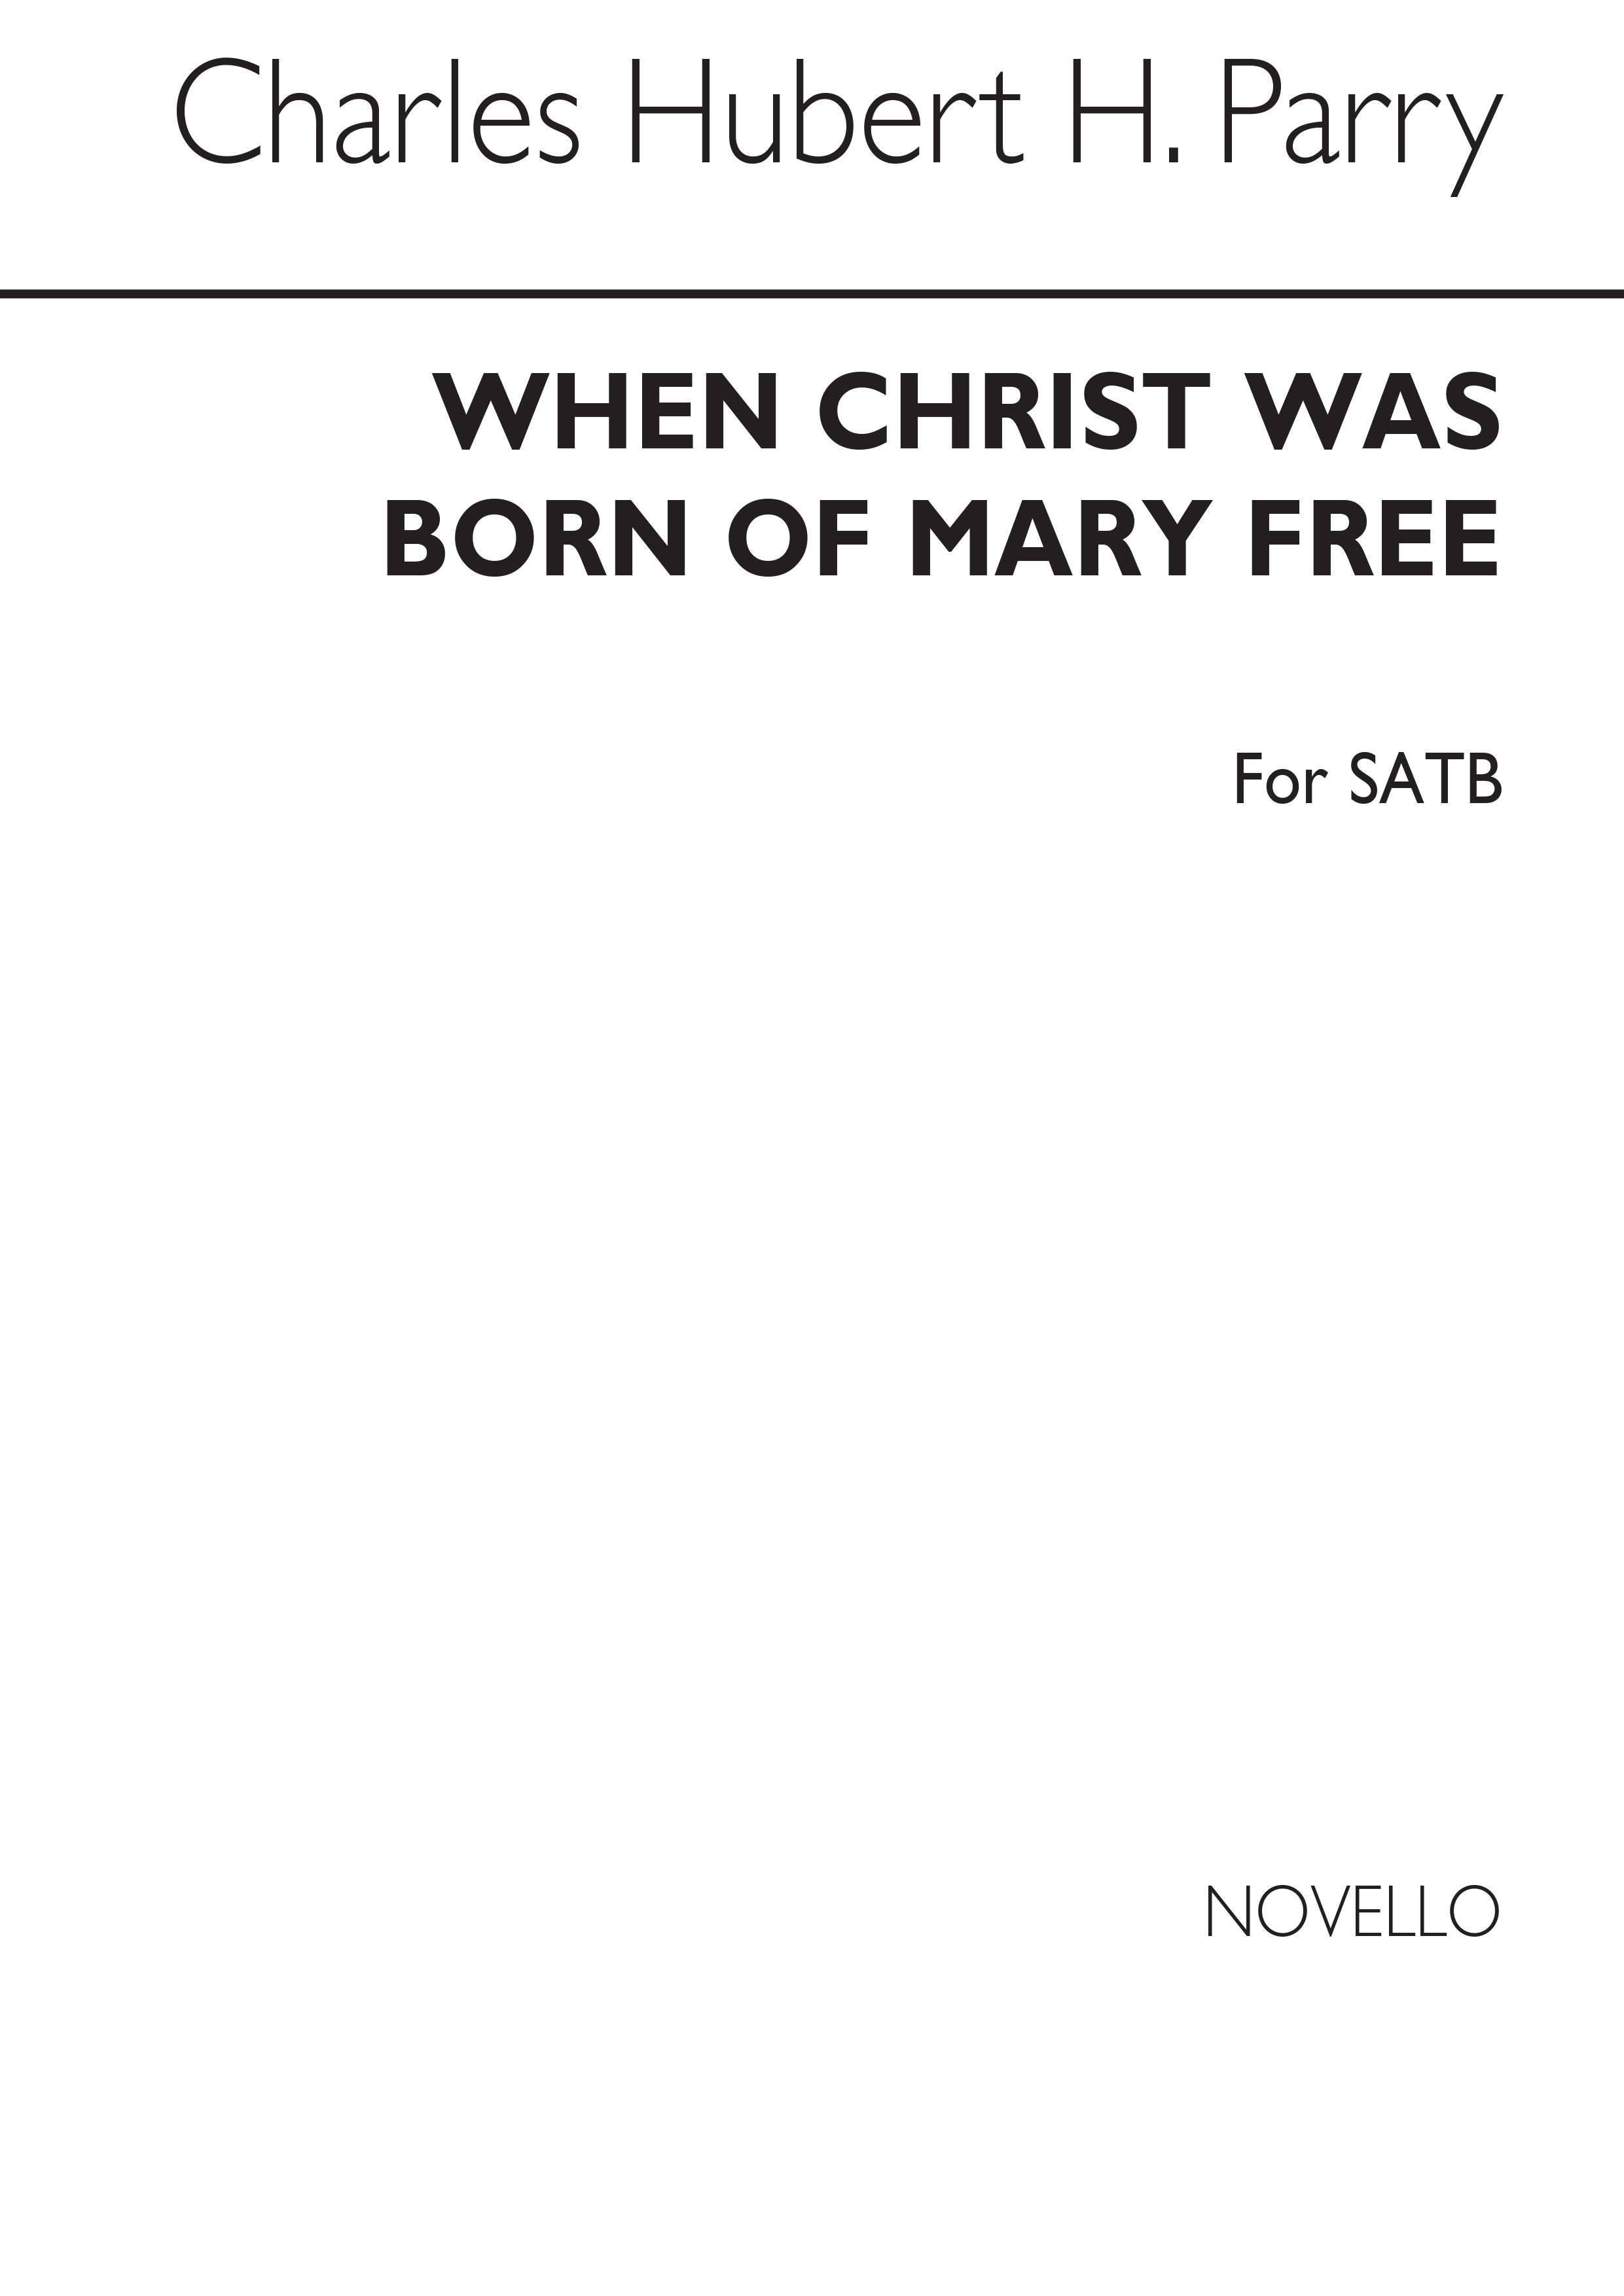 C H H Parry: When Christ Was Born Of Mary Free (SATB)